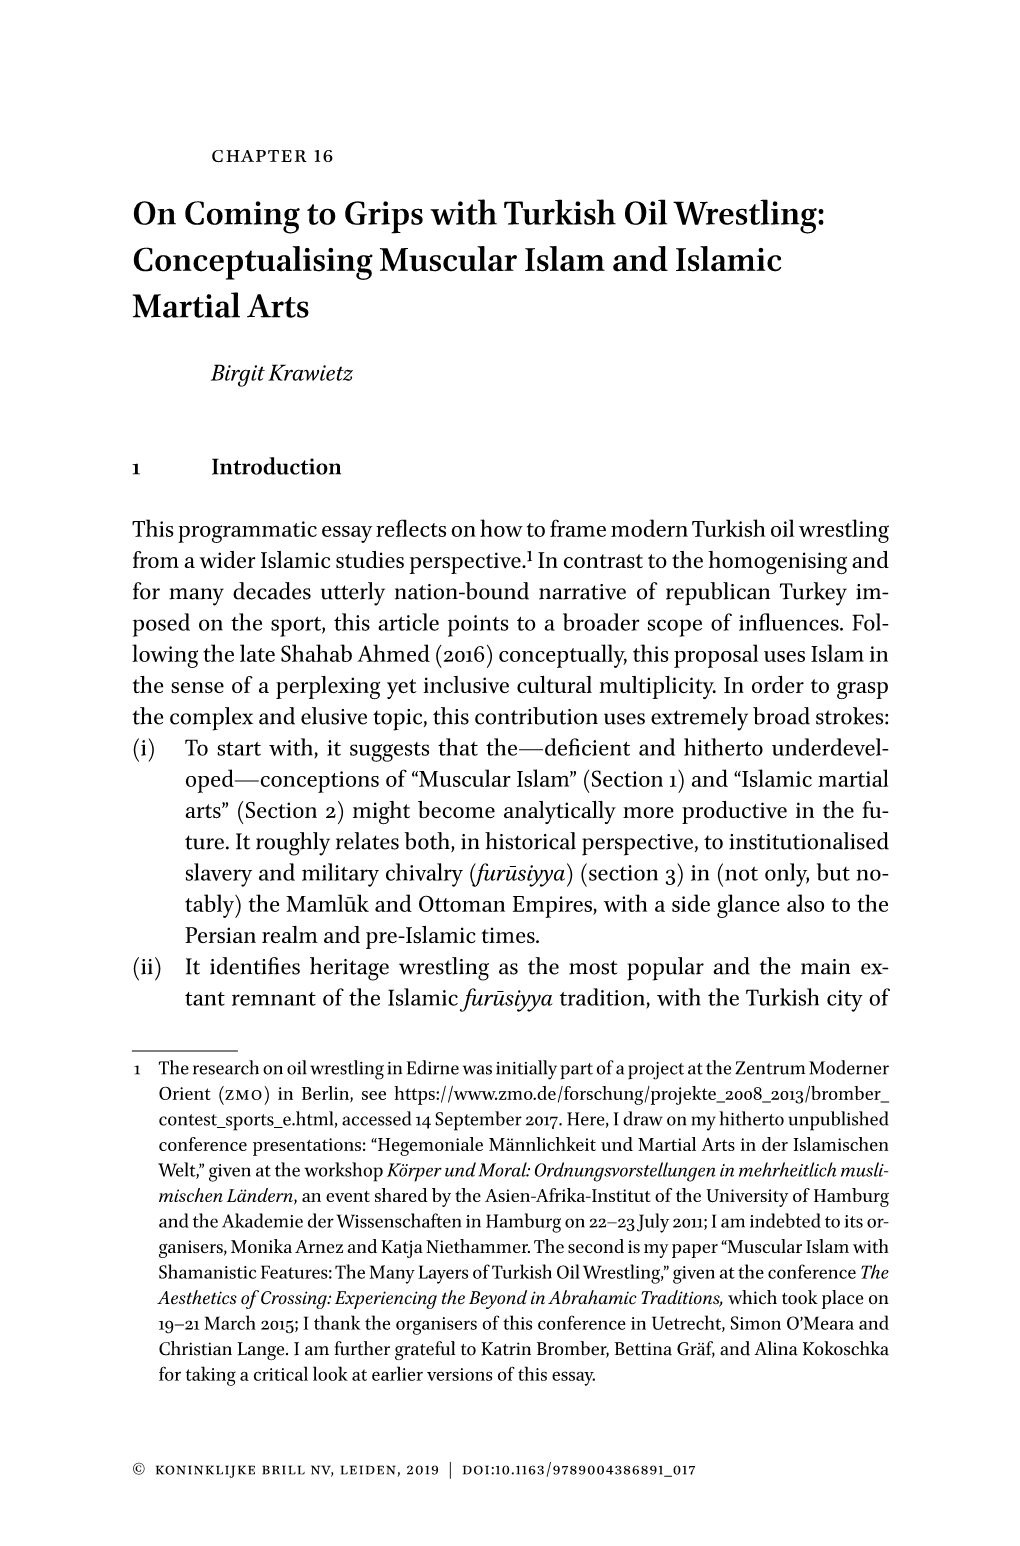 On Coming to Grips with Turkish Oil Wrestling: Conceptualising Muscular Islam and Islamic Martial Arts